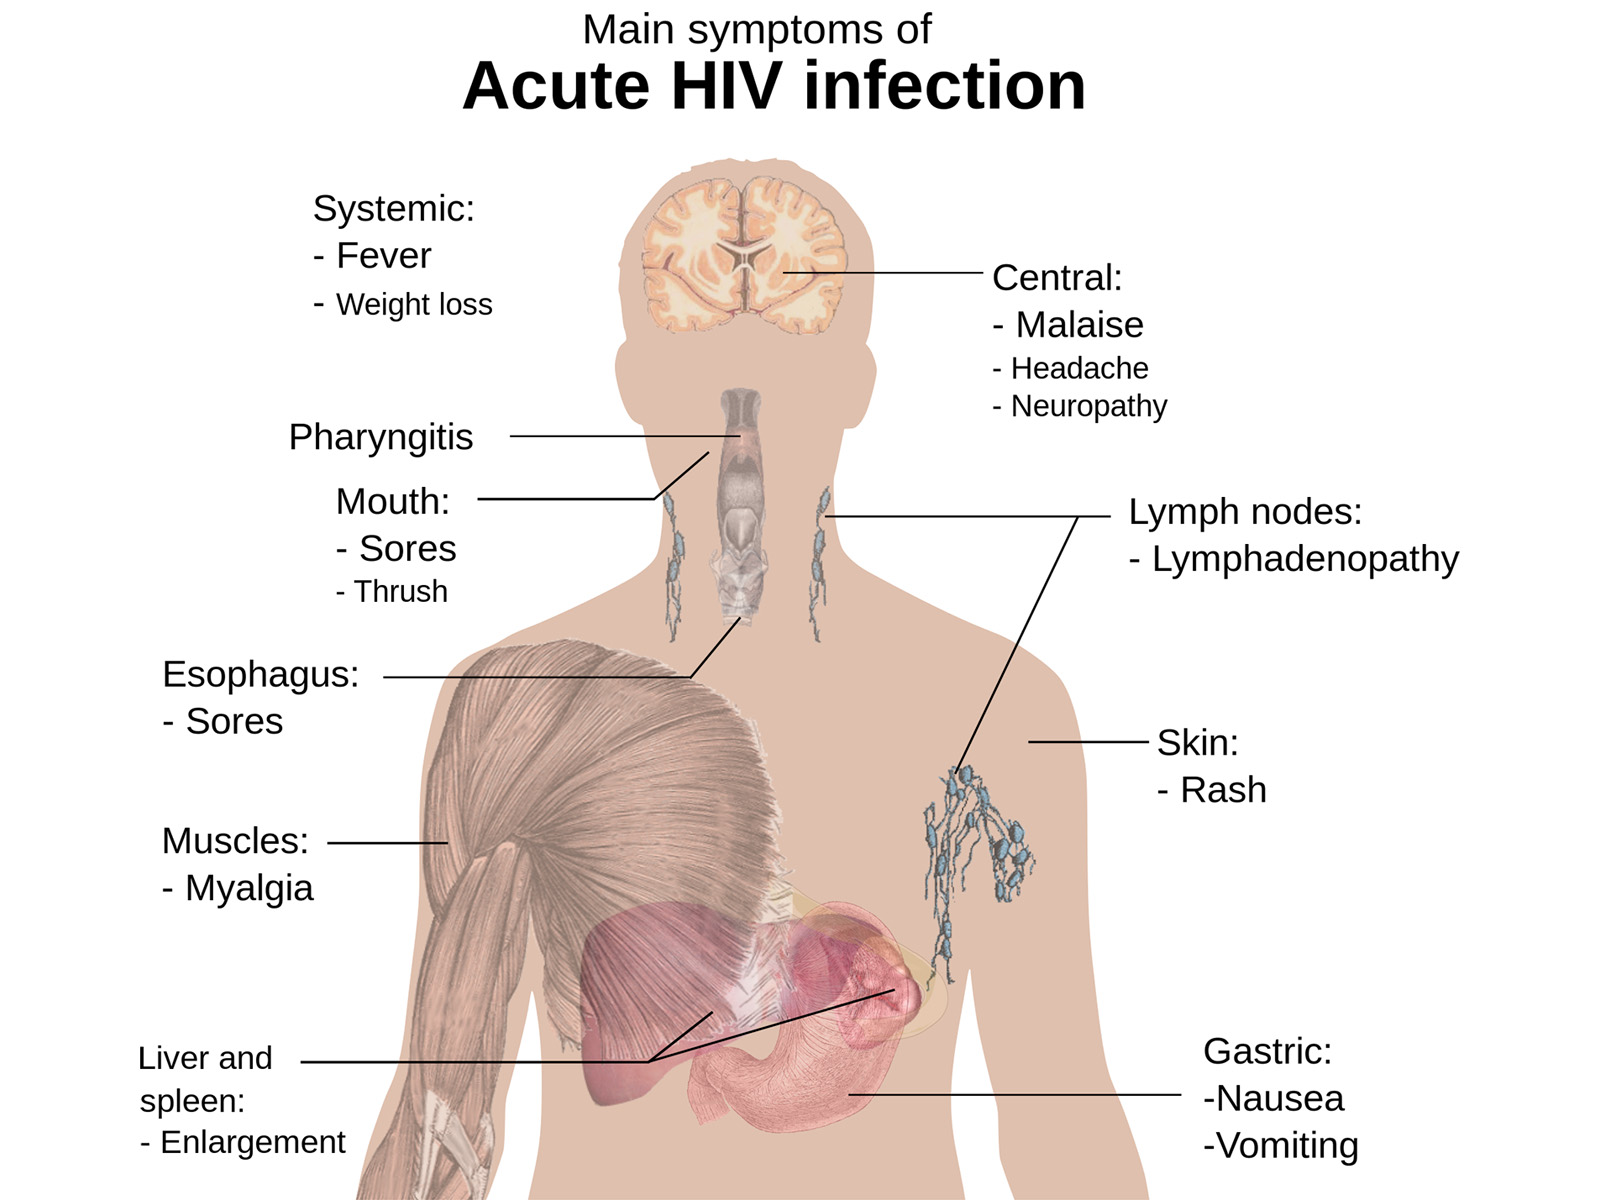 How Does HIV/AIDS Affect the Mouth?